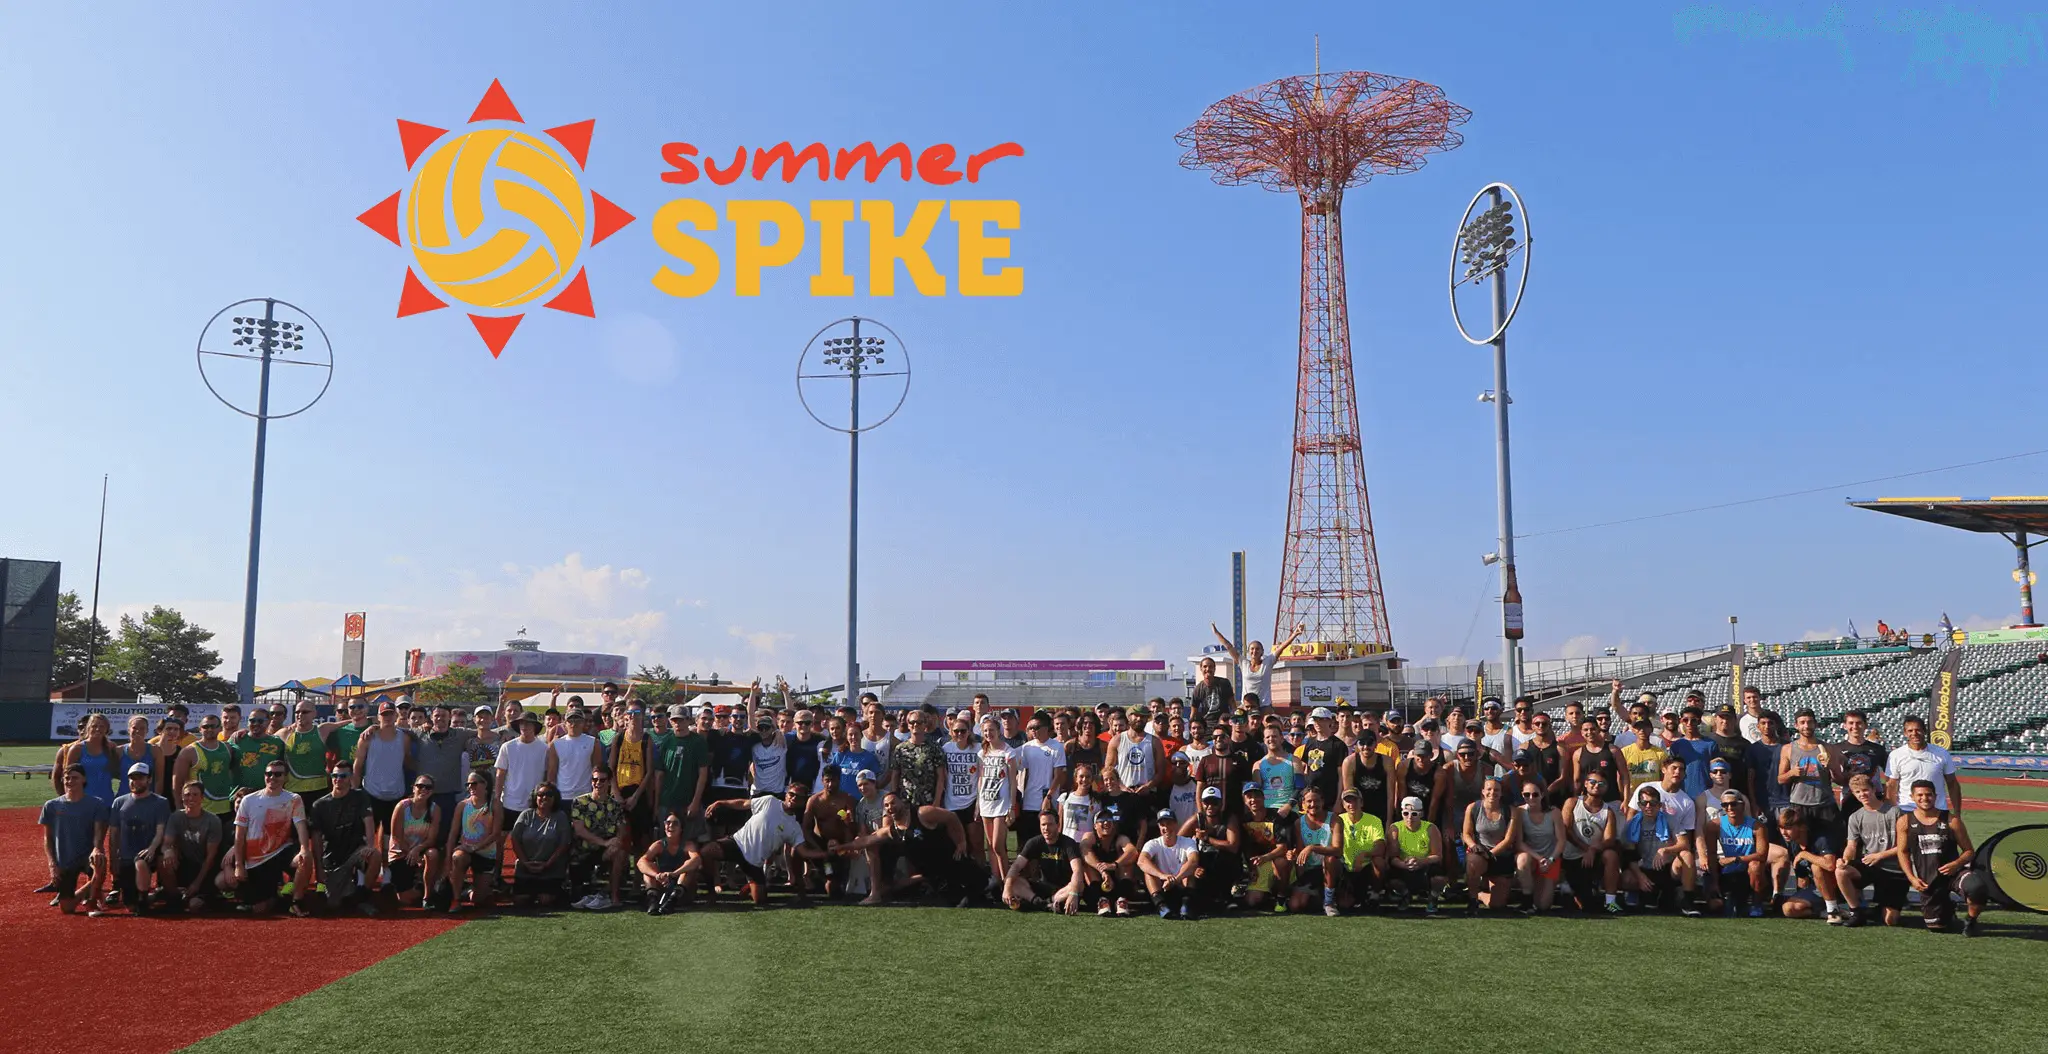 The teams pose for a picture at national Spikeball tournament SummerSpike 2019 at MCU Park, a minor league stadium for the New York Mets affiliate